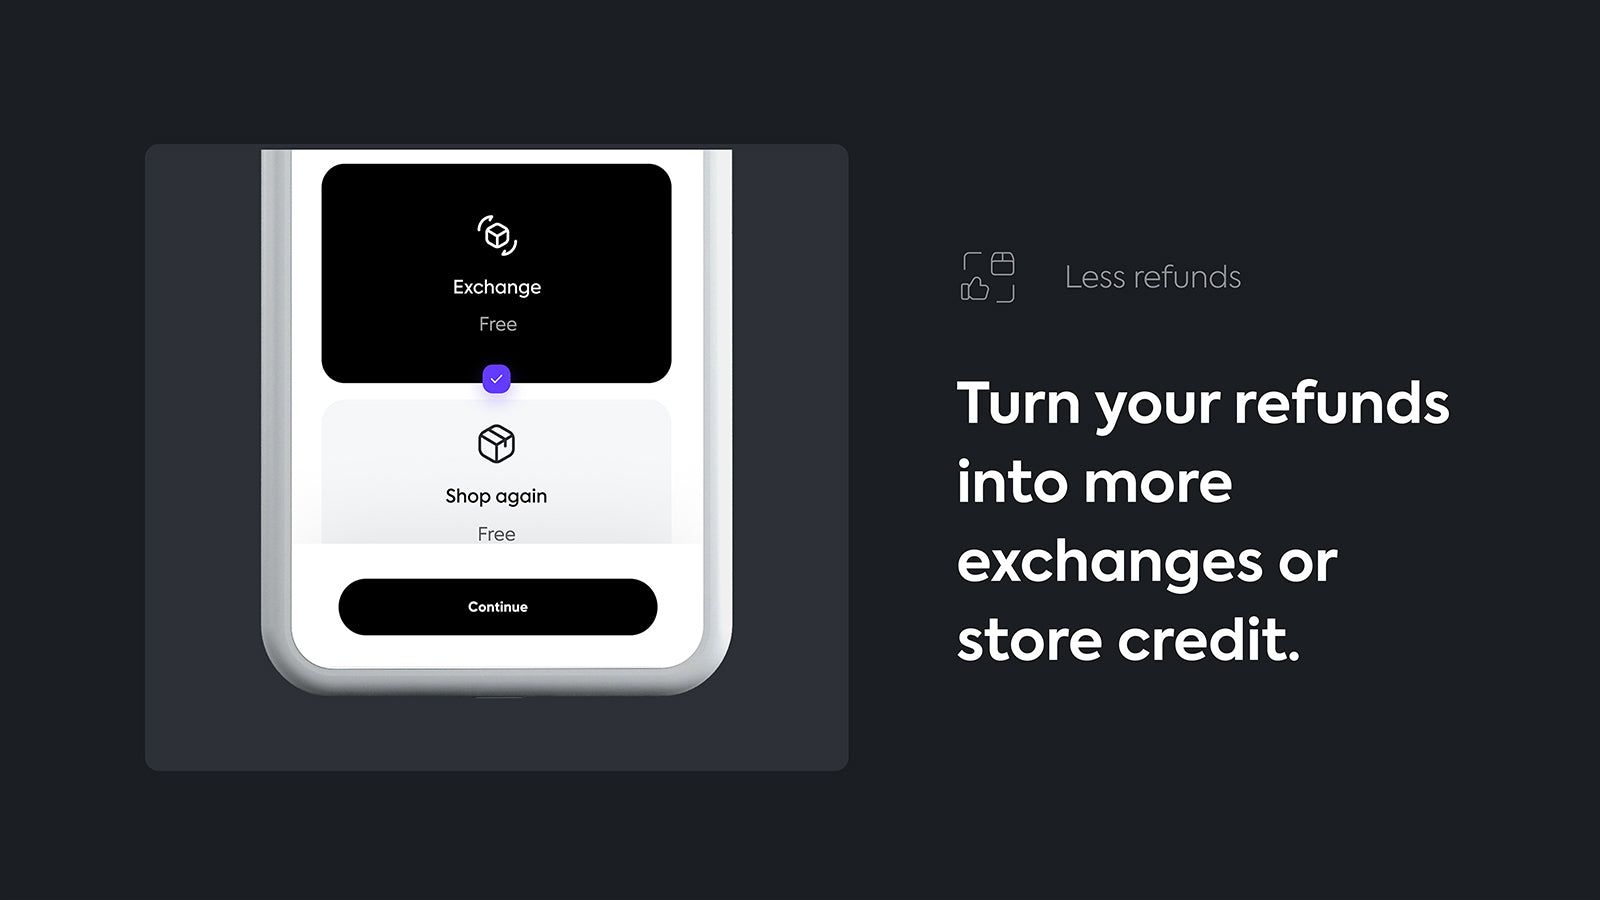 Convert your refunds into exchanges & store credit